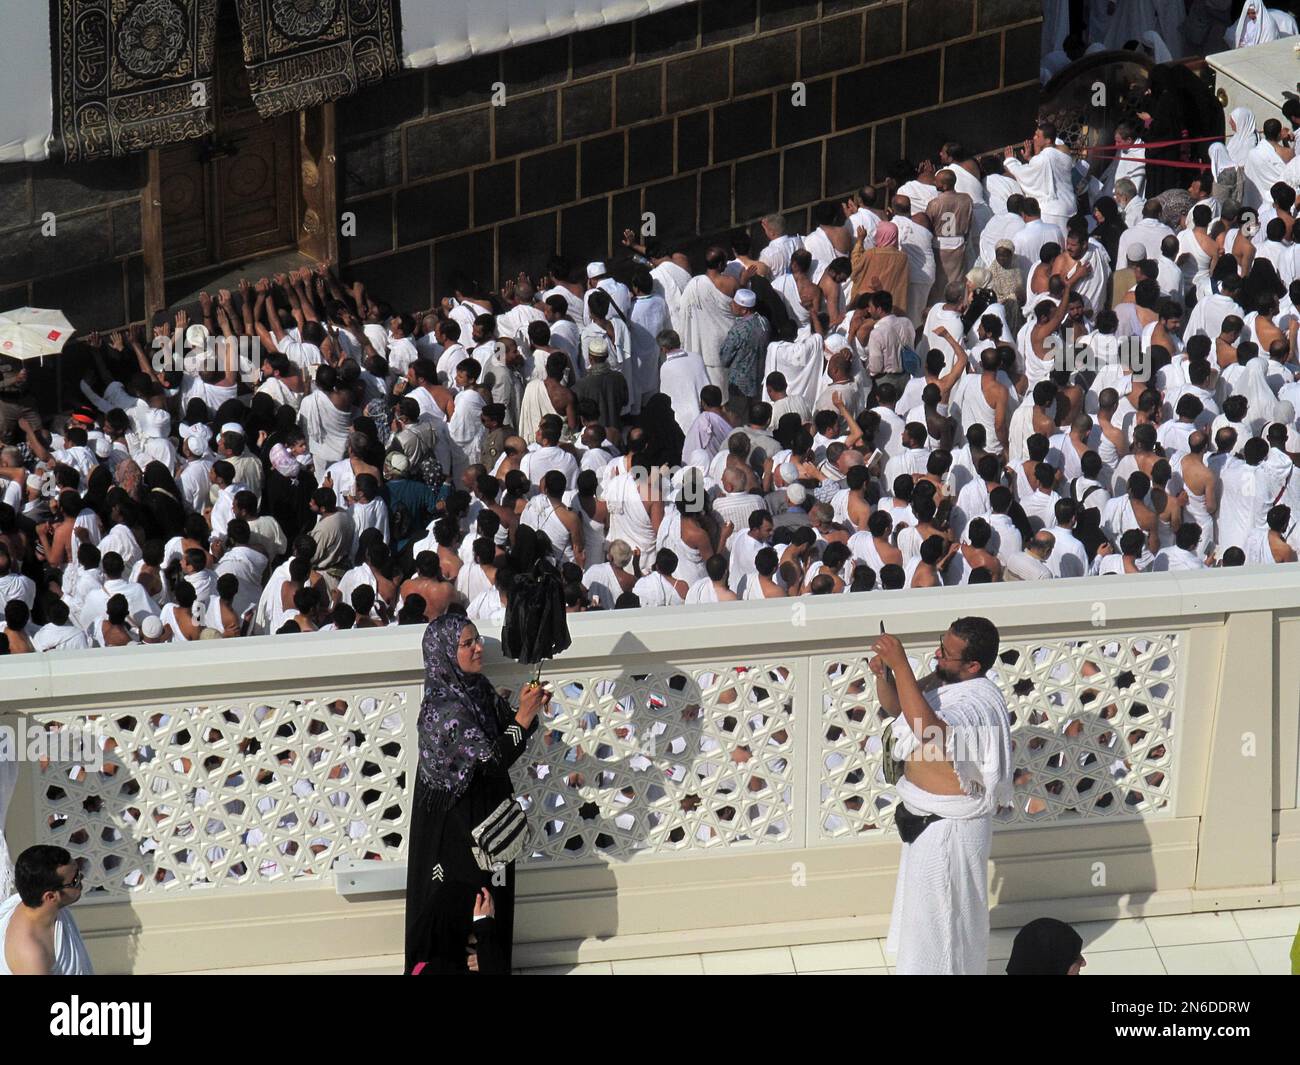 Muslim pilgrims take pictures in front of the Kaaba, the cube-shaped ...